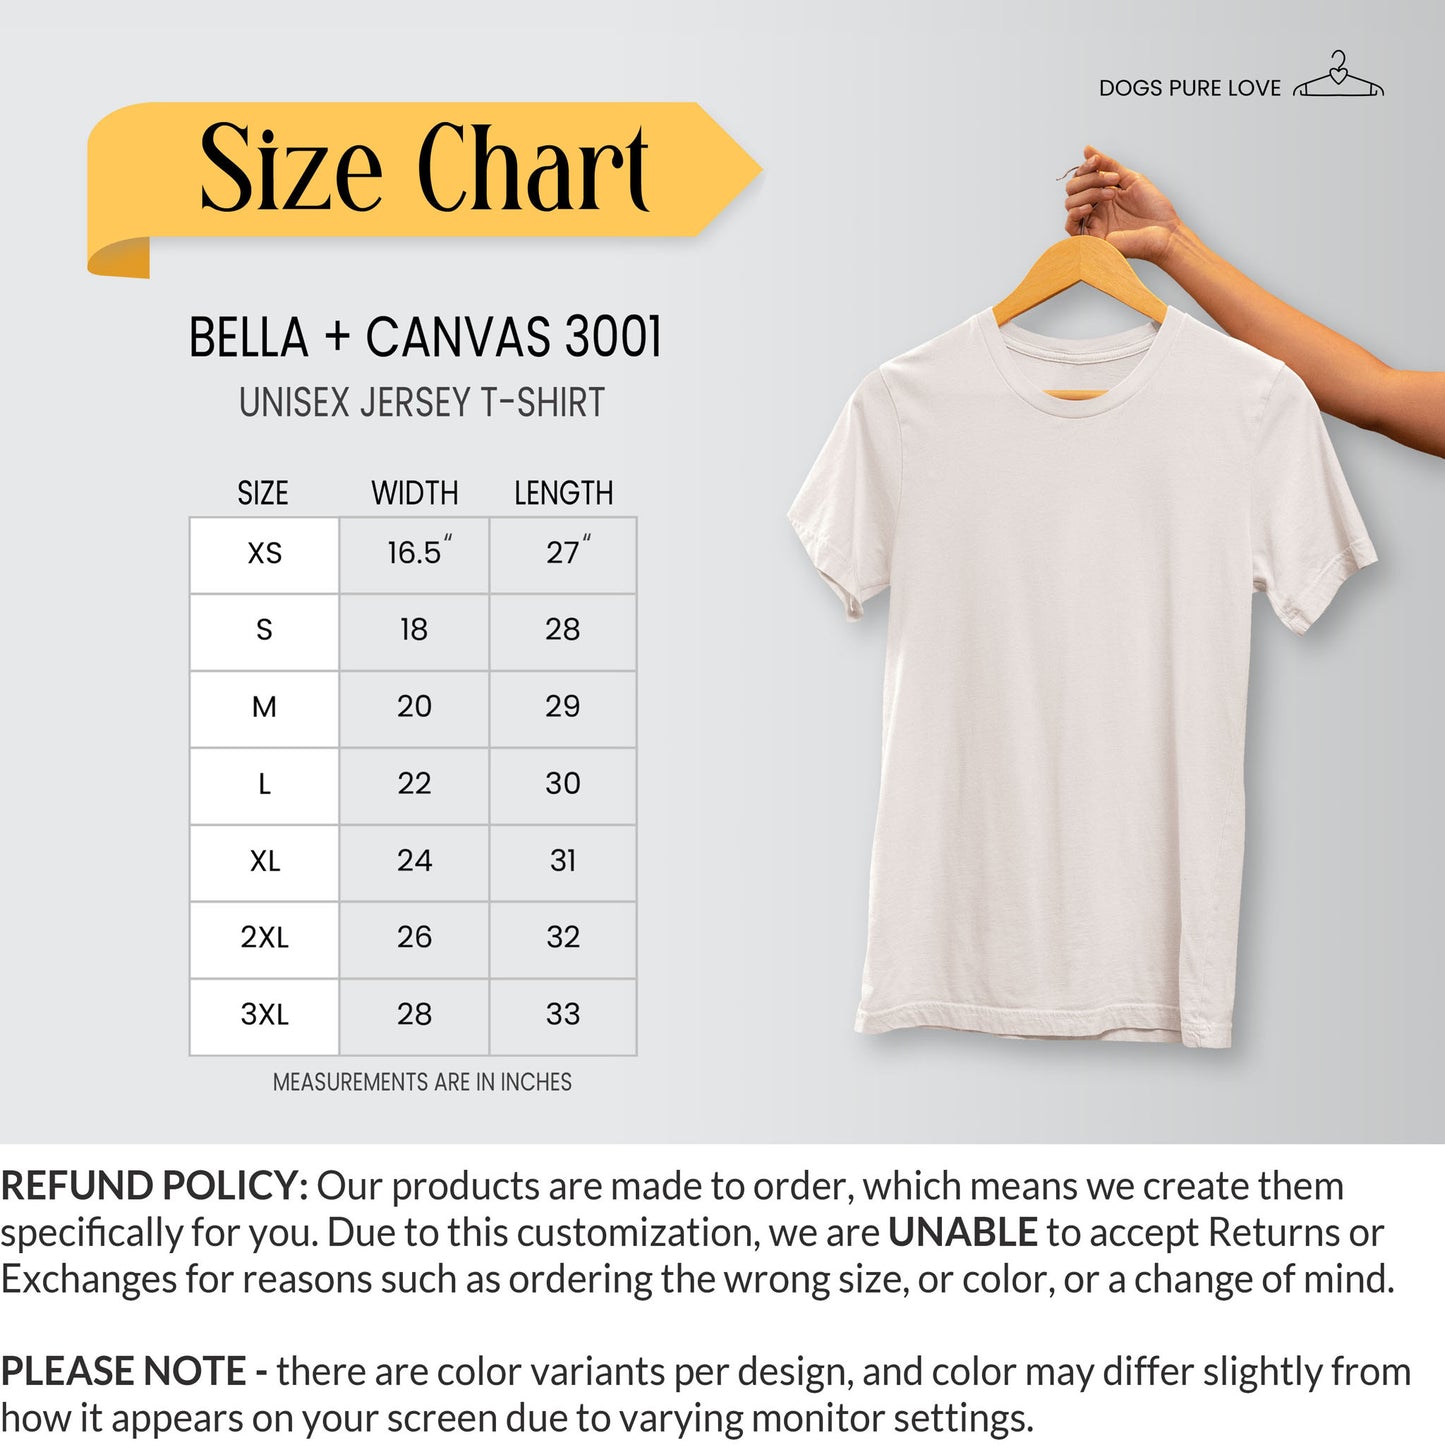 T-shirt Size Chart by Dogs Pure Love, featuring measurements and Refund Policy.